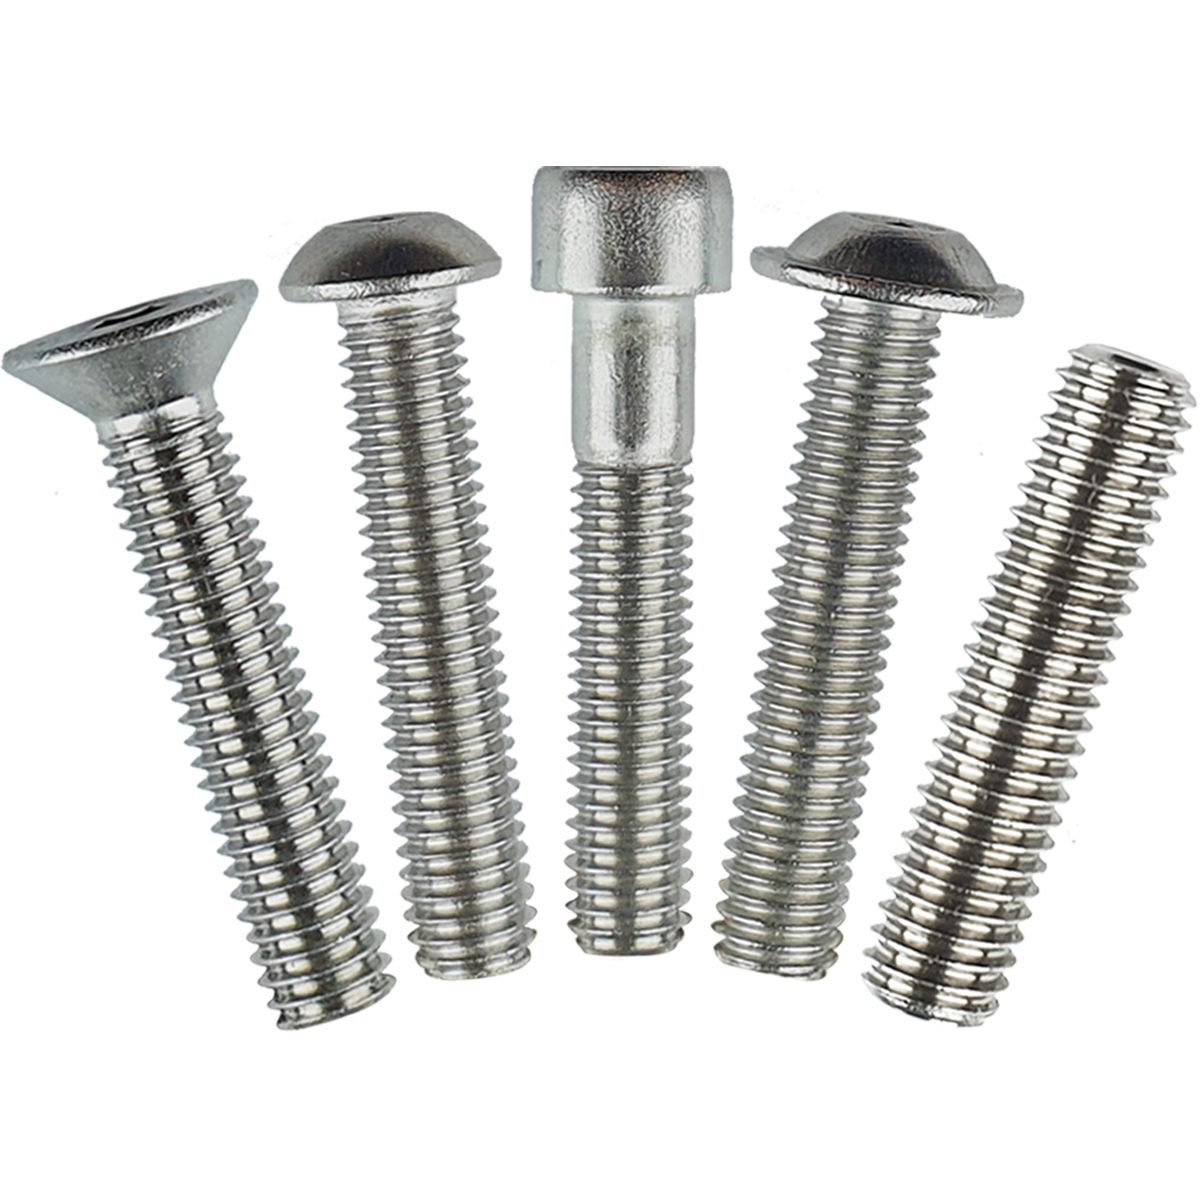 Socket head machine screws with a hex recess an extensive range of diameters, lengths, materials, and head types